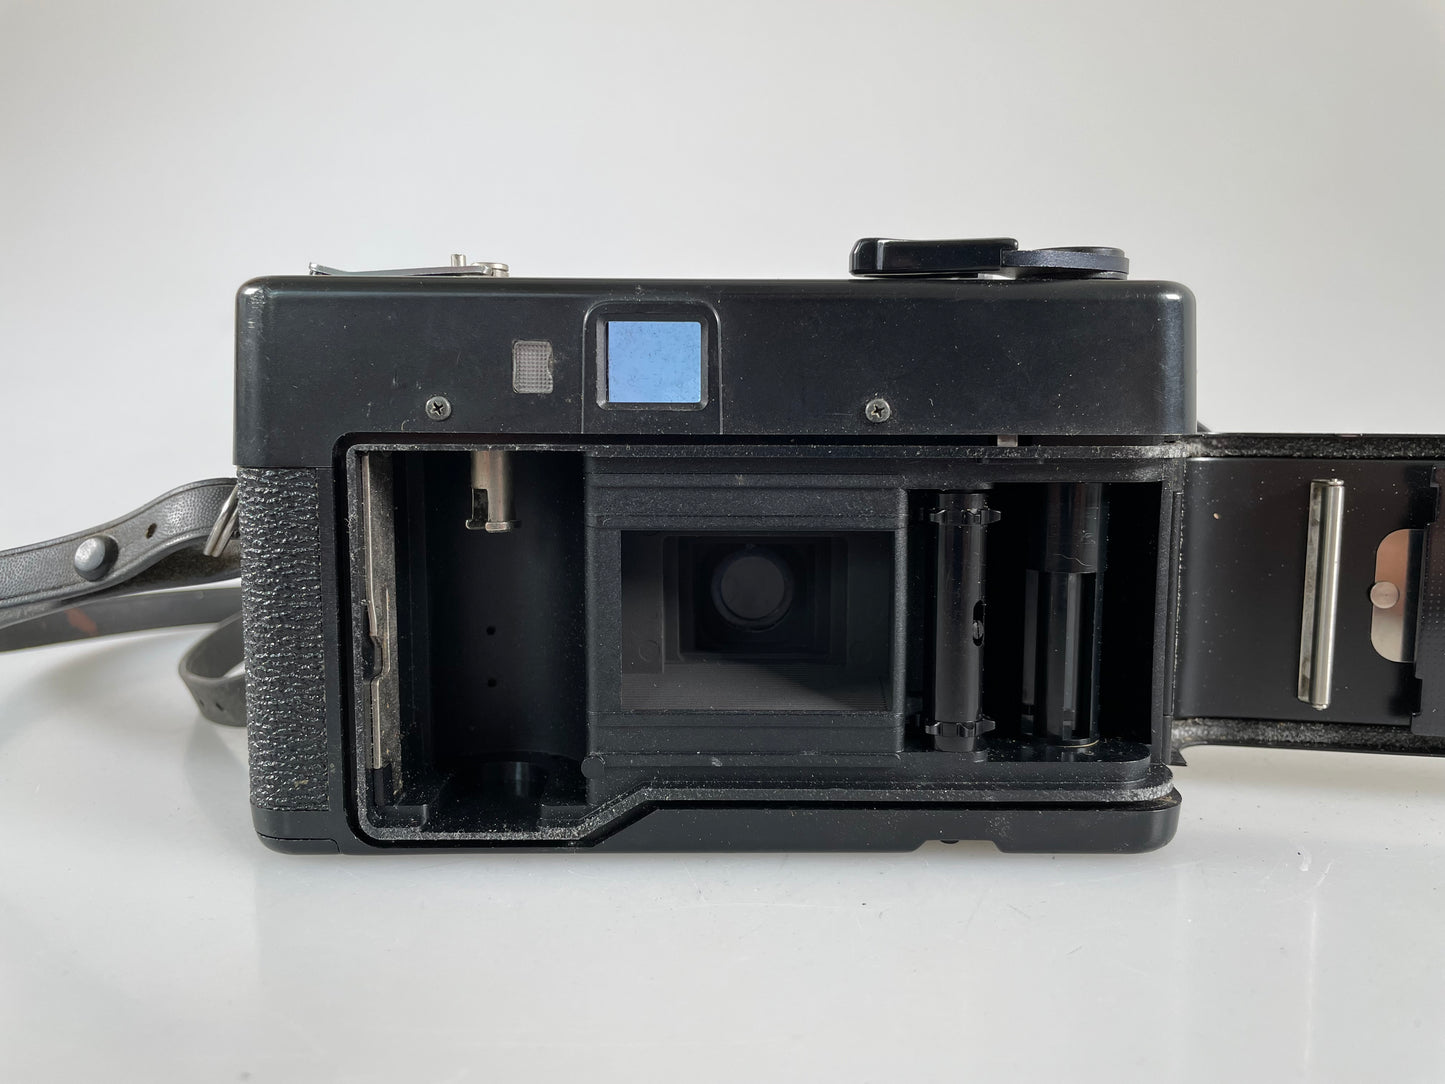 YASHICA MF-2 35mm Point & Shot Film Camera with 38mm F4 Lens